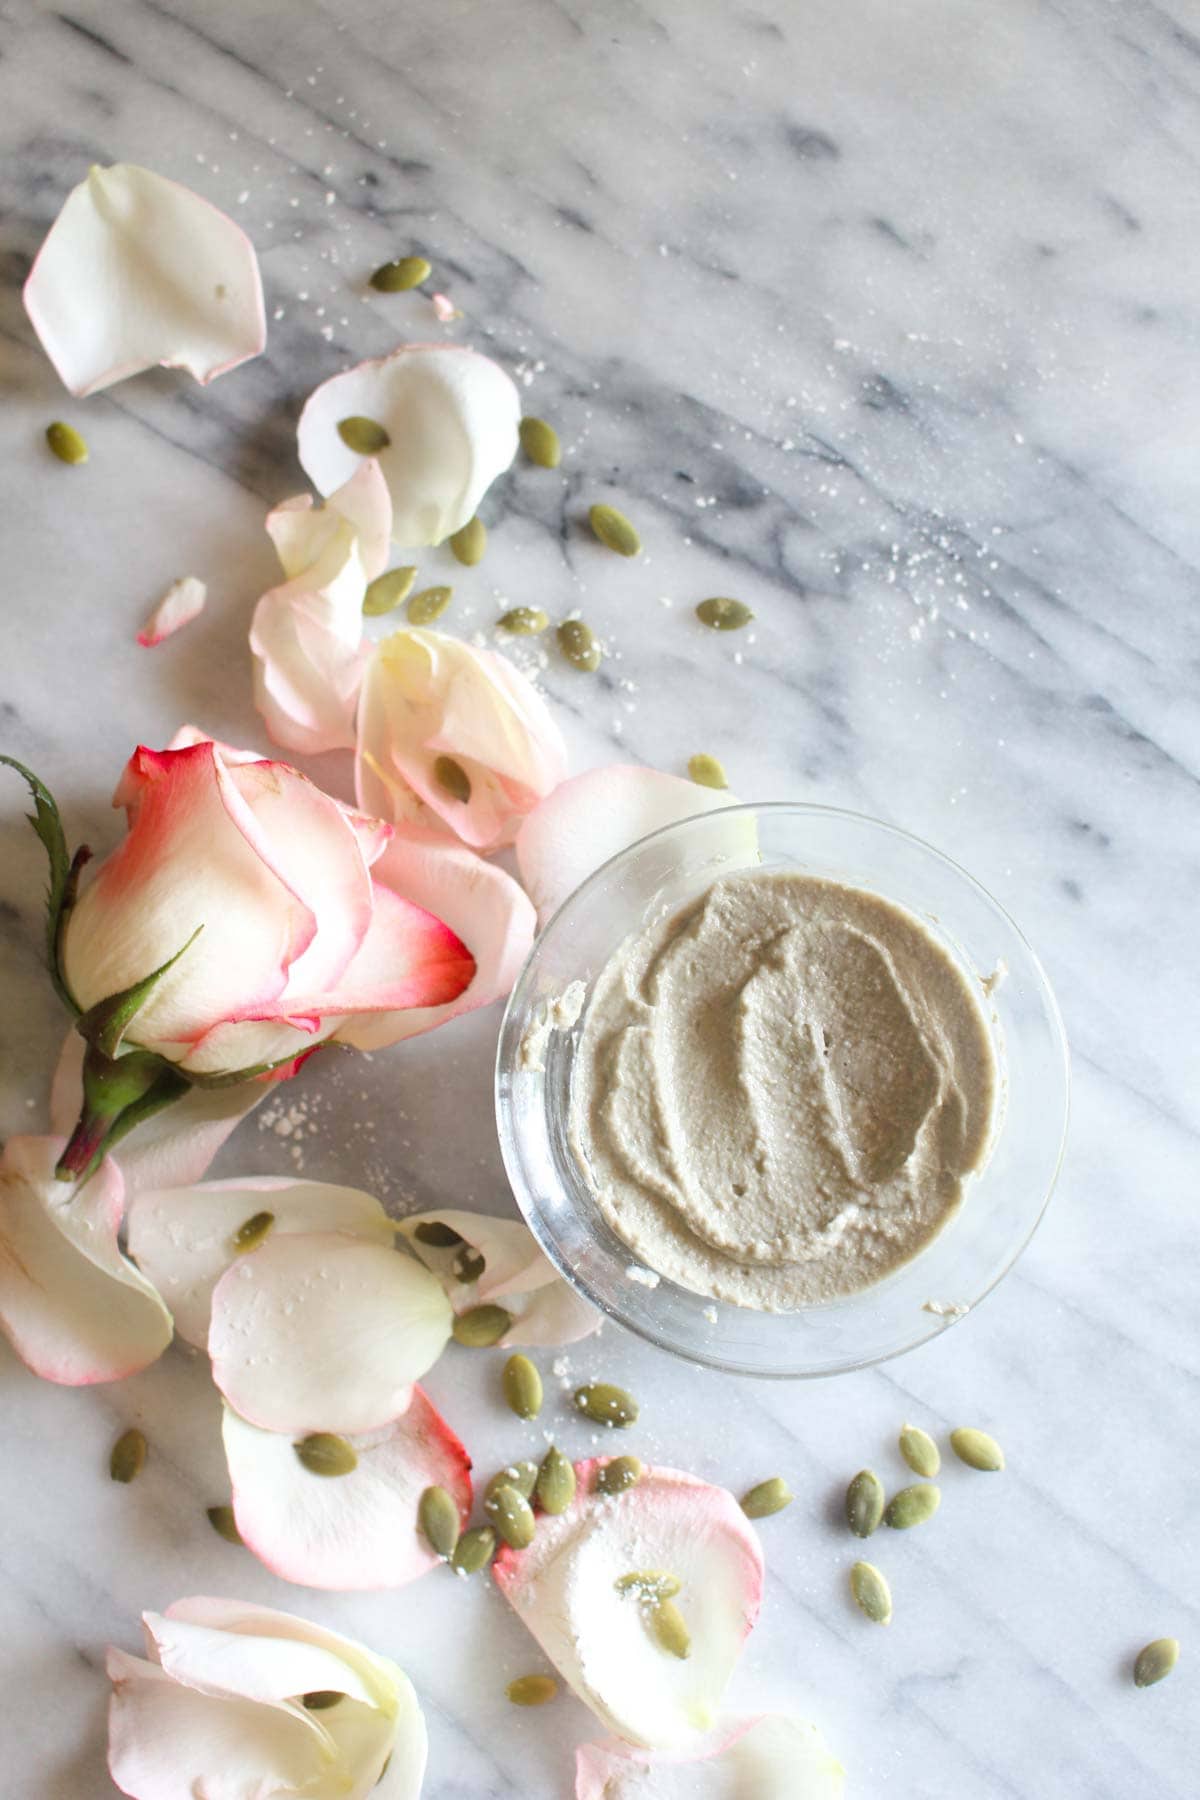 This Pumpkin Seed Rosewater Face Mask is a hydrating and detoxifying facial all-in-one! It will gently clean pores and banish blackheads while hydrating your skin. Great for all skin types - including sensitive. | CatchingSeeds.com